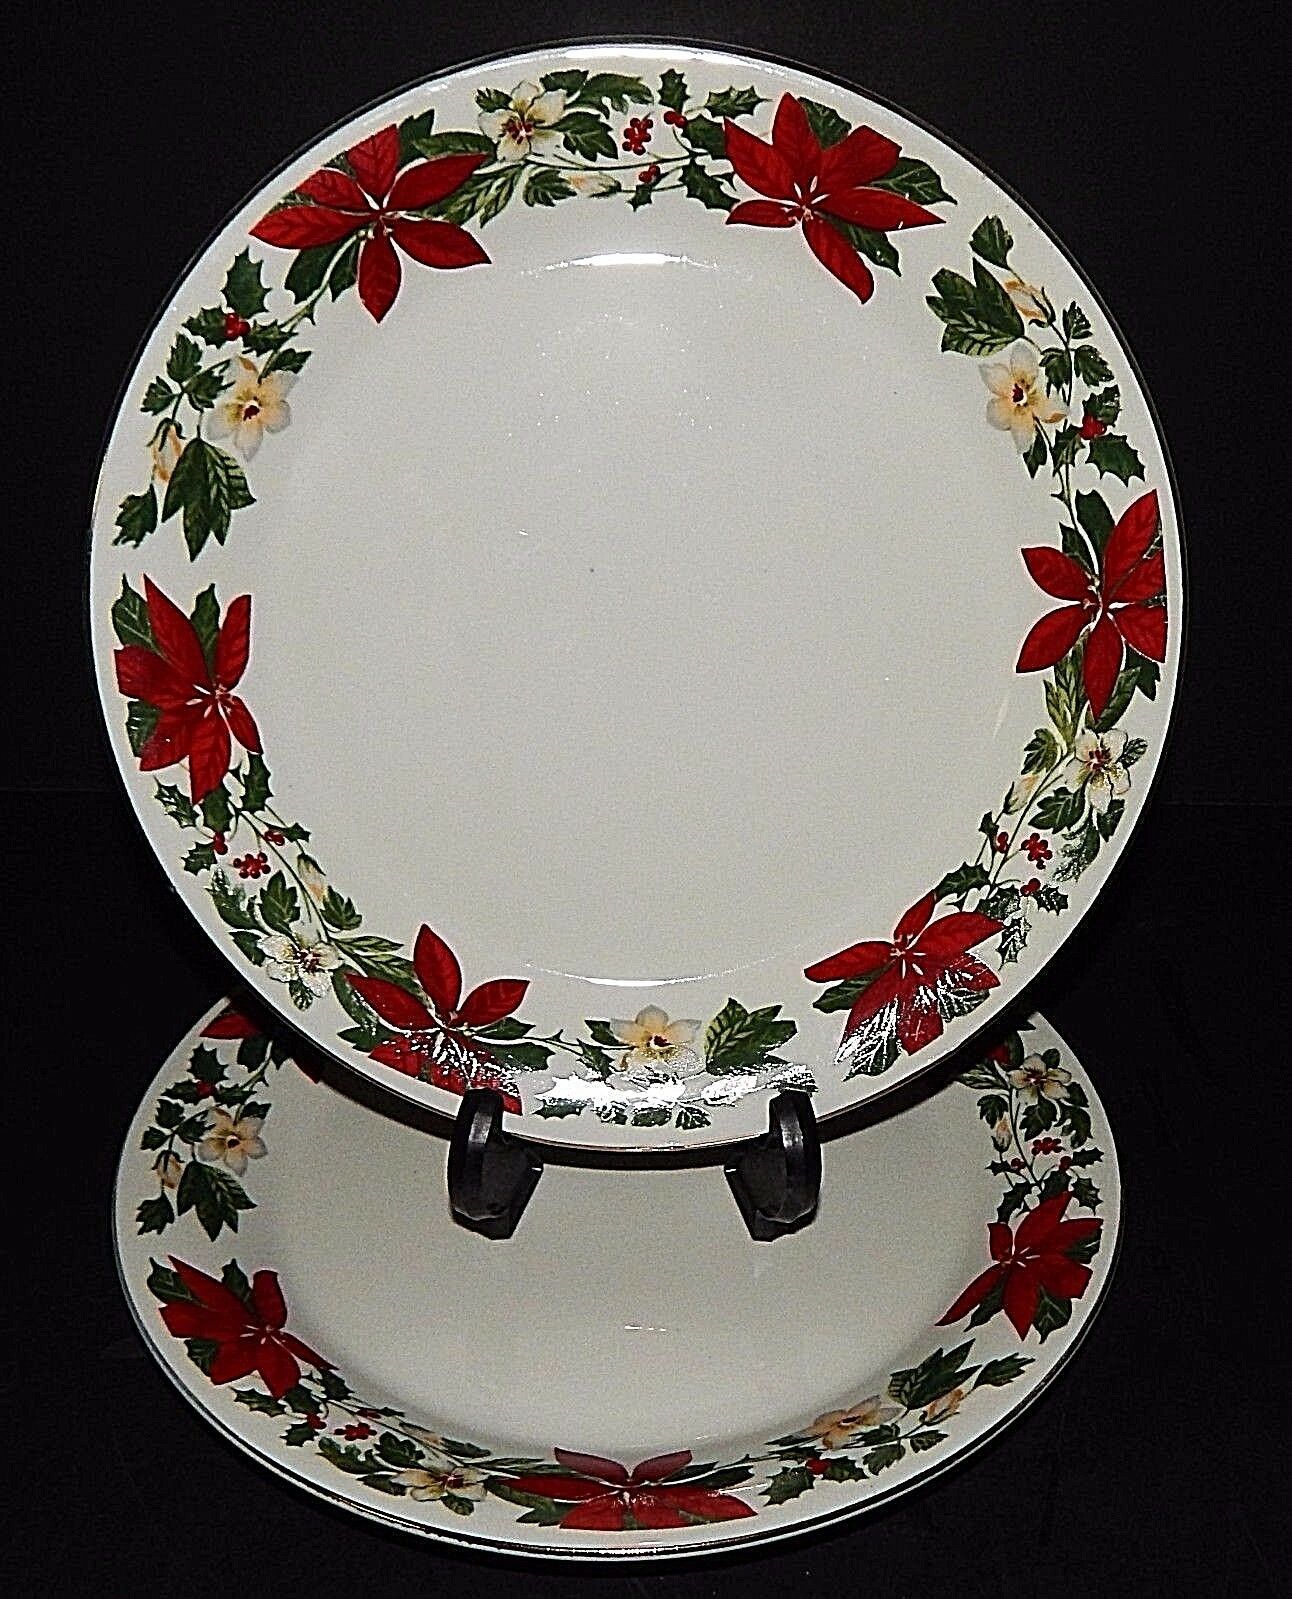 Primary image for 2 Gibson Designs Poinsettia Christmas Holiday Dinner Plates  3400249 Red Green